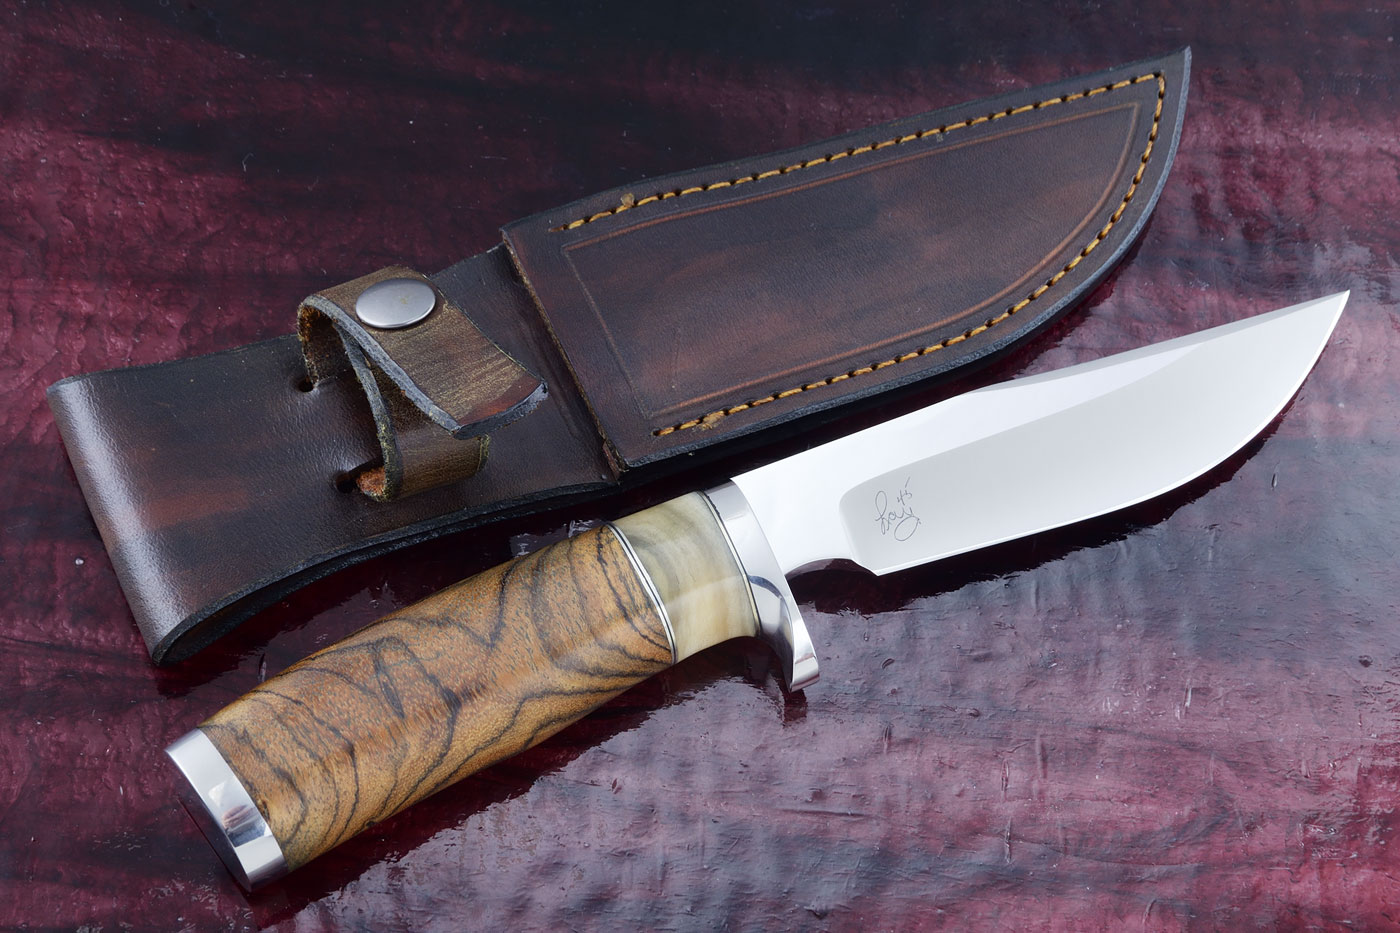 Elk Hunter with Bocote and Sheep Horn (45th Anniversary Knife)